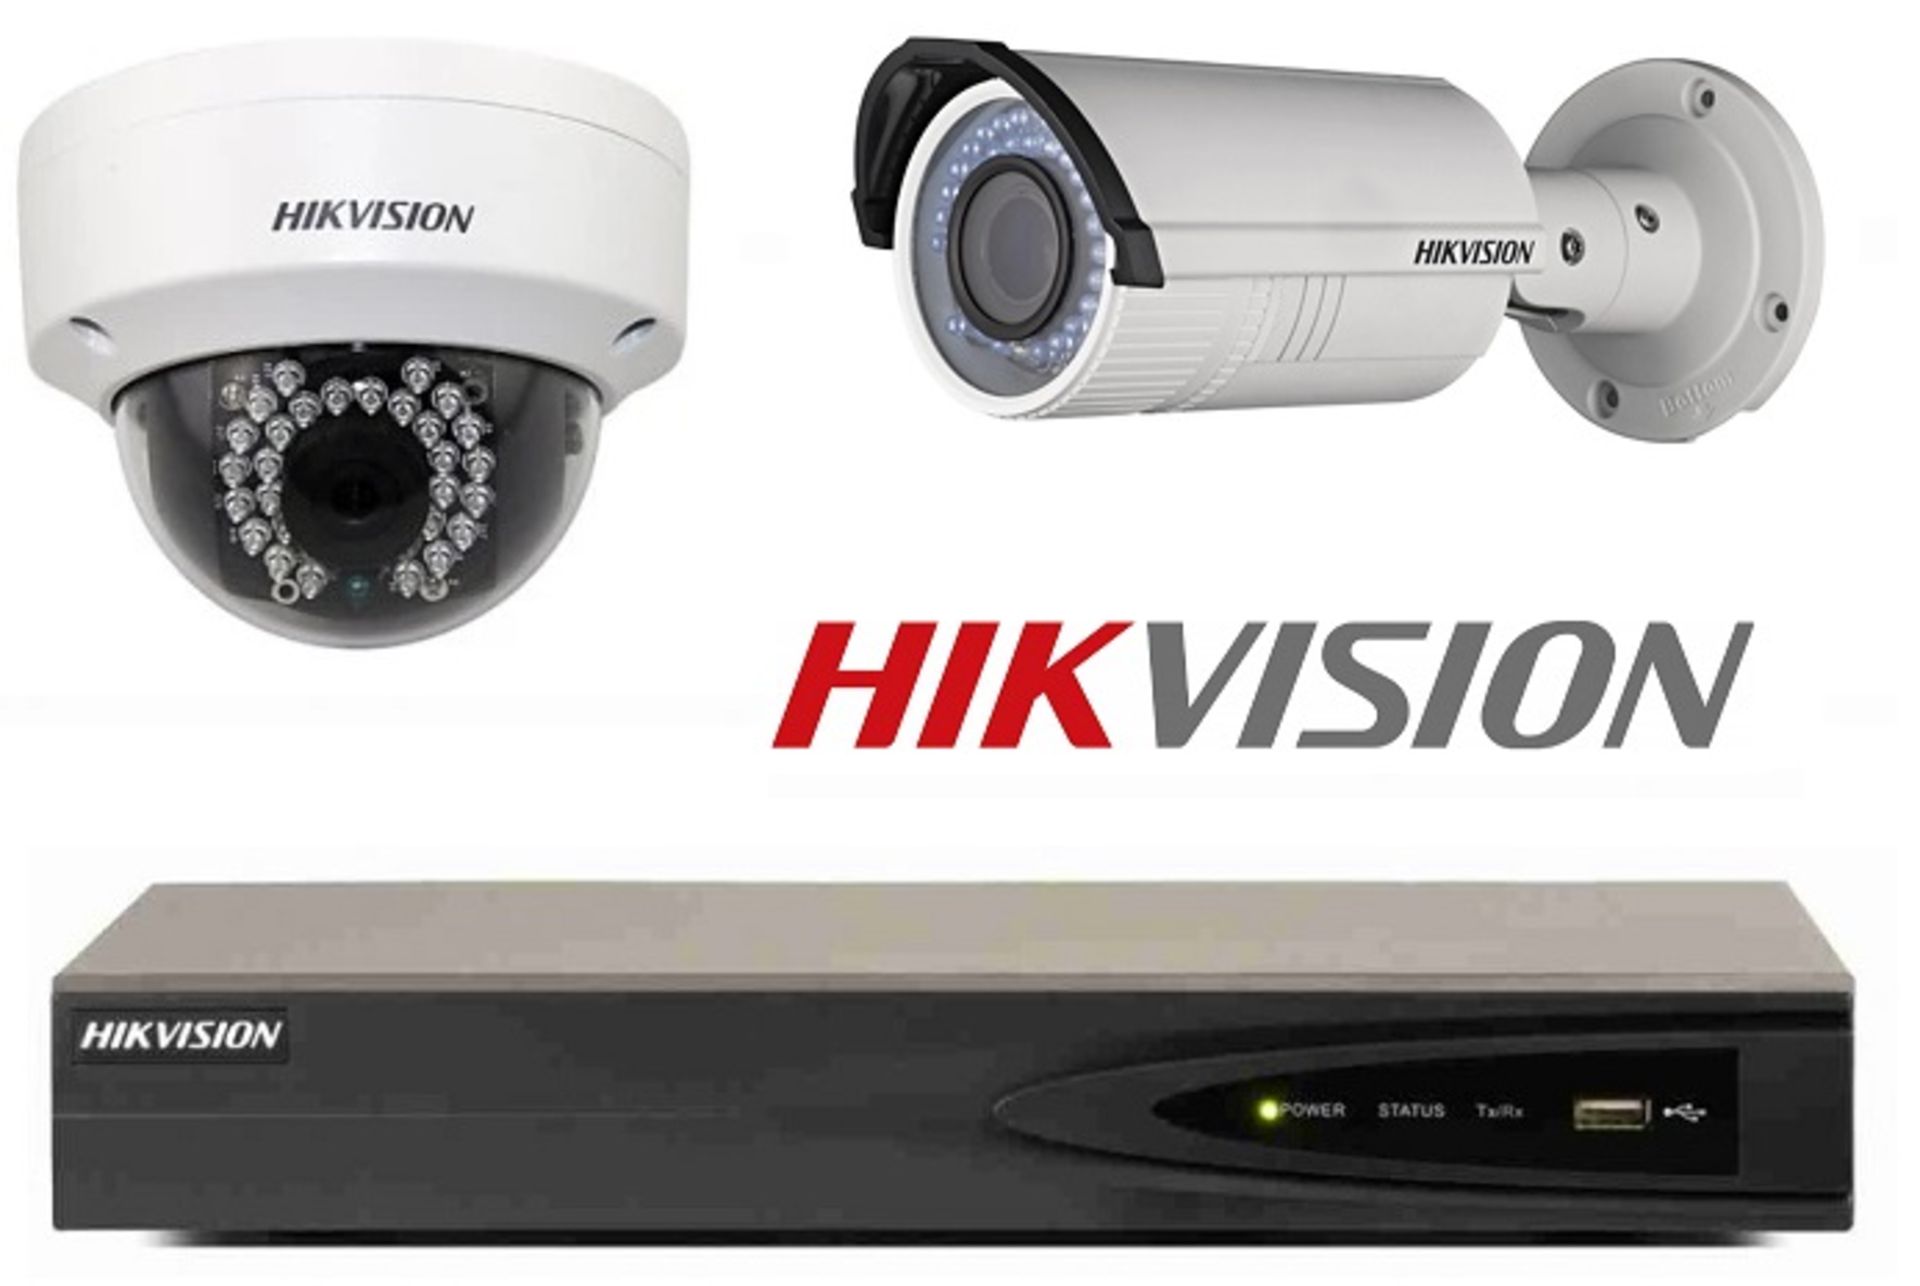 1 x Hikvision Digital CCTV 8 Channel Video Recorder With 7 x Infra Red Network Cameras